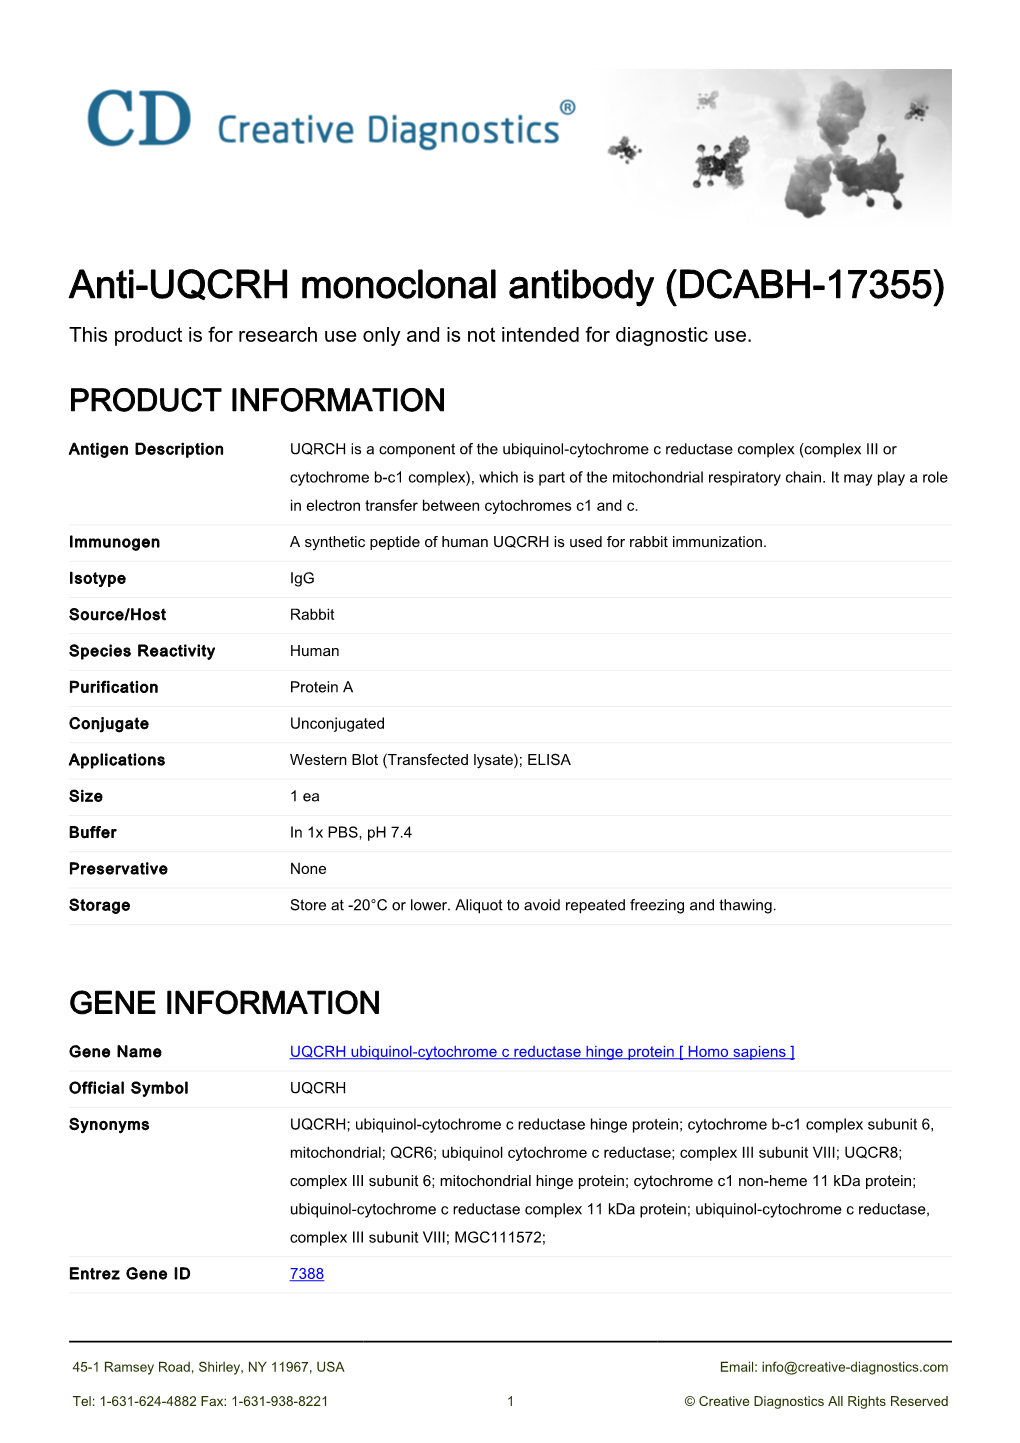 Anti-UQCRH Monoclonal Antibody (DCABH-17355) This Product Is for Research Use Only and Is Not Intended for Diagnostic Use